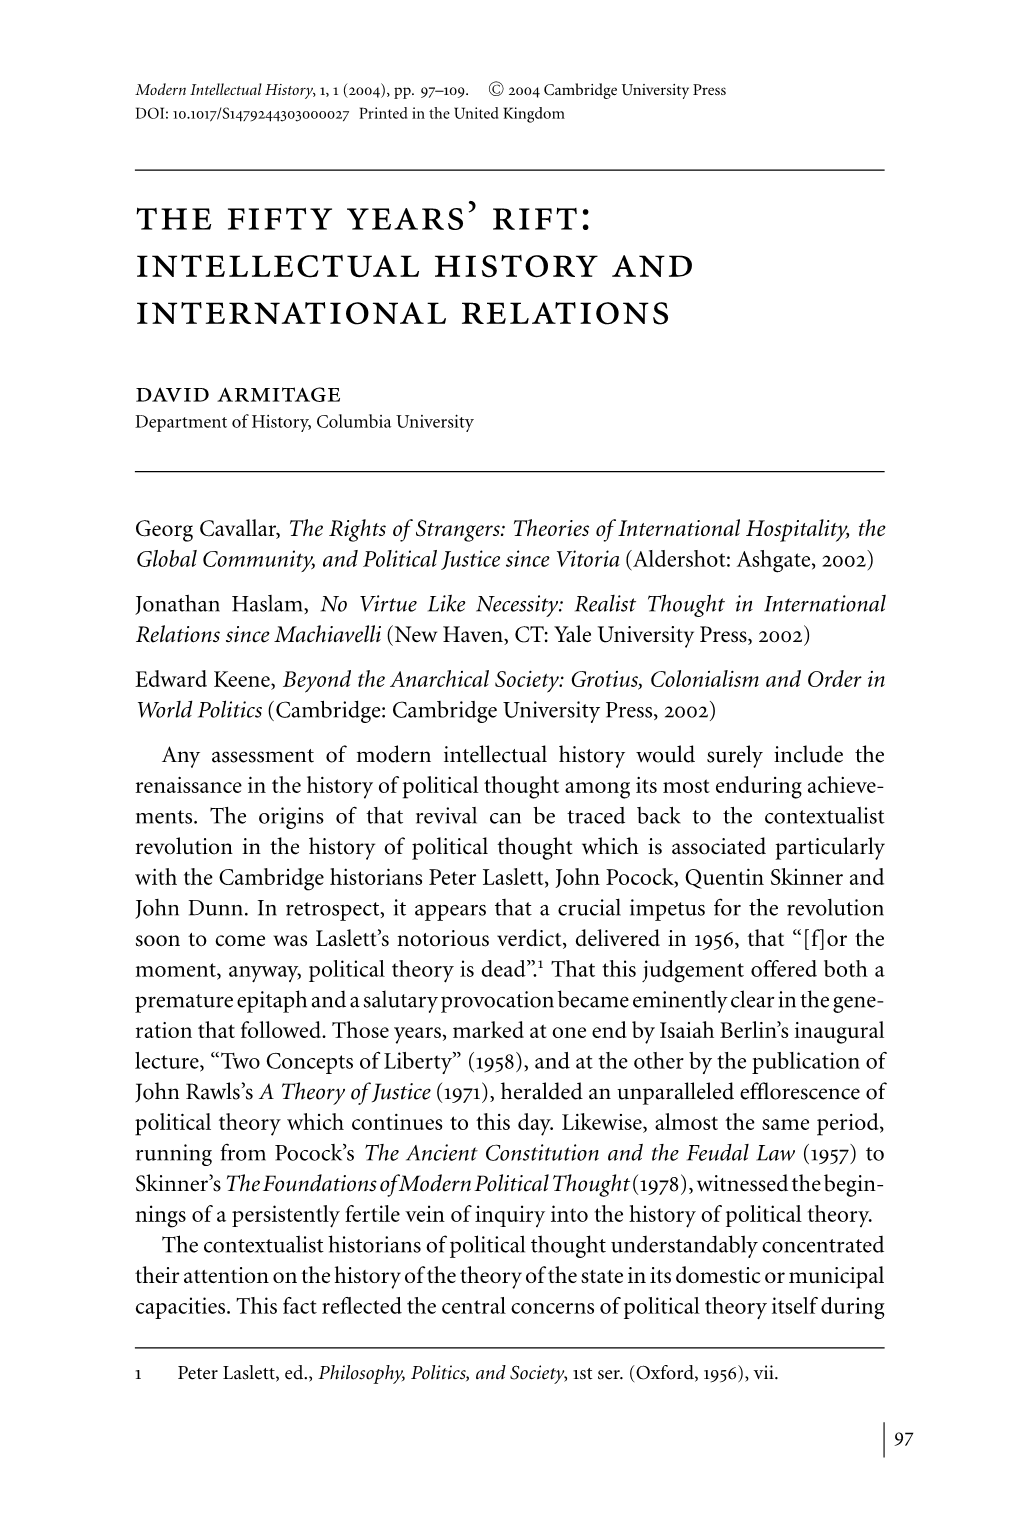 Intellectual History and International Relations David Armitage Department of History, Columbia University